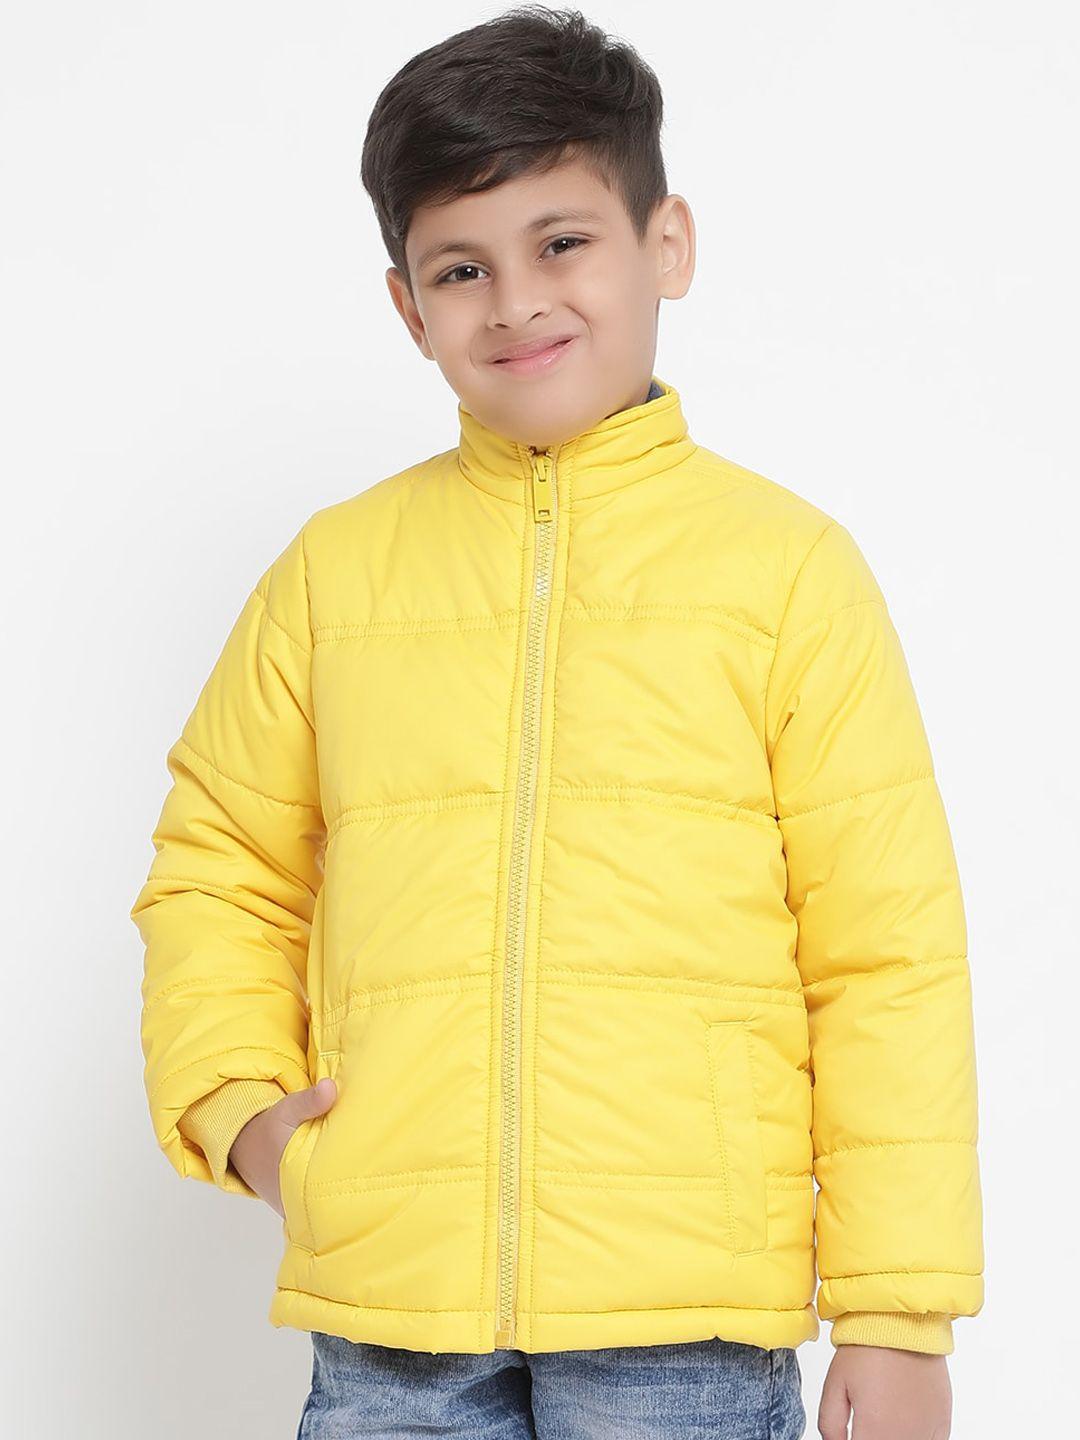 the white cub boys water resistant puffer jacket